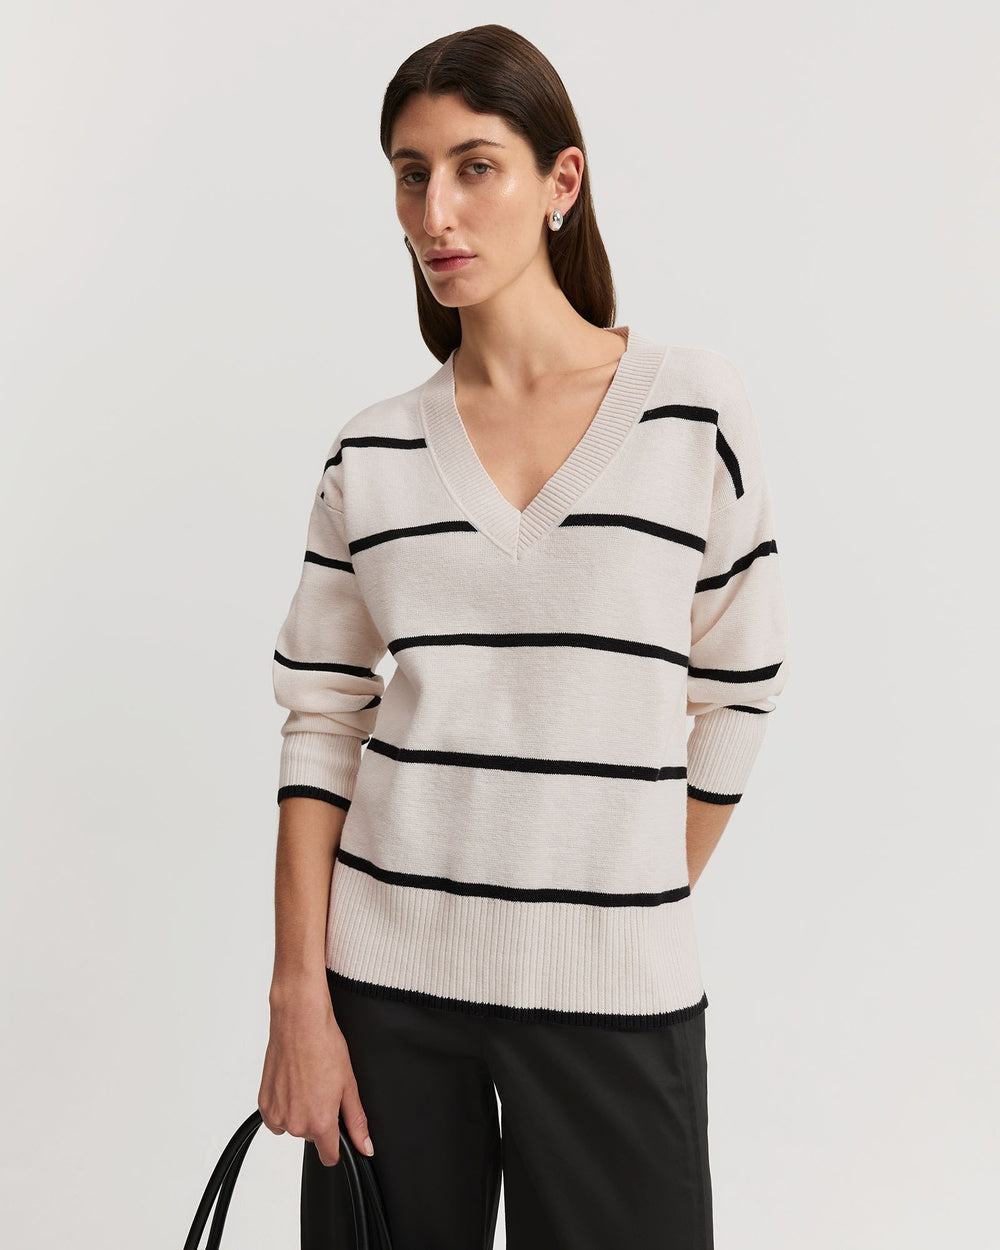 Cotton Linen Blend Stripe Knit for pairing with jeans for causal days